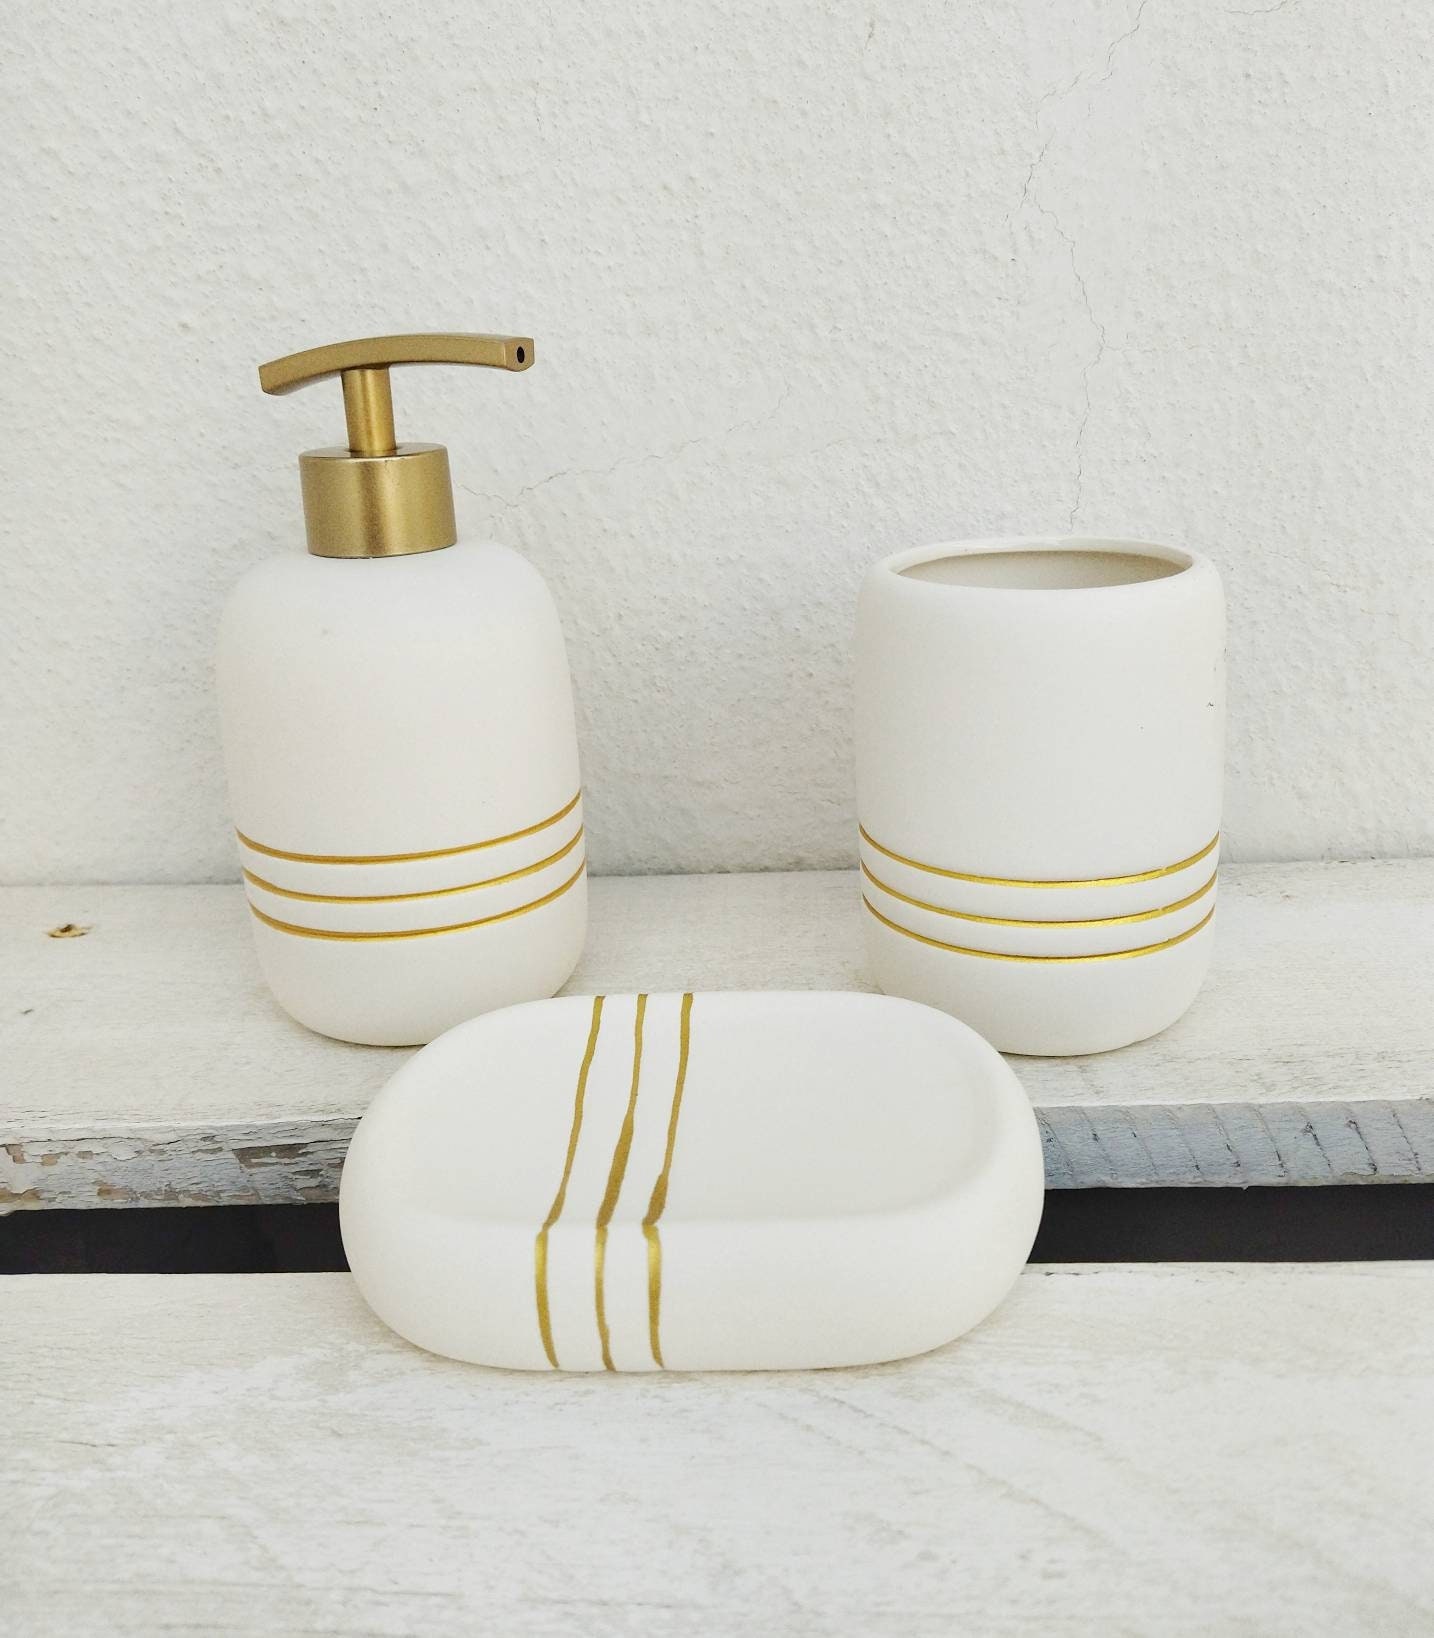 Bathroom Accessory Set Ceramic Gold&White Wash Cup ToothBrush Holder 5Pcs New 